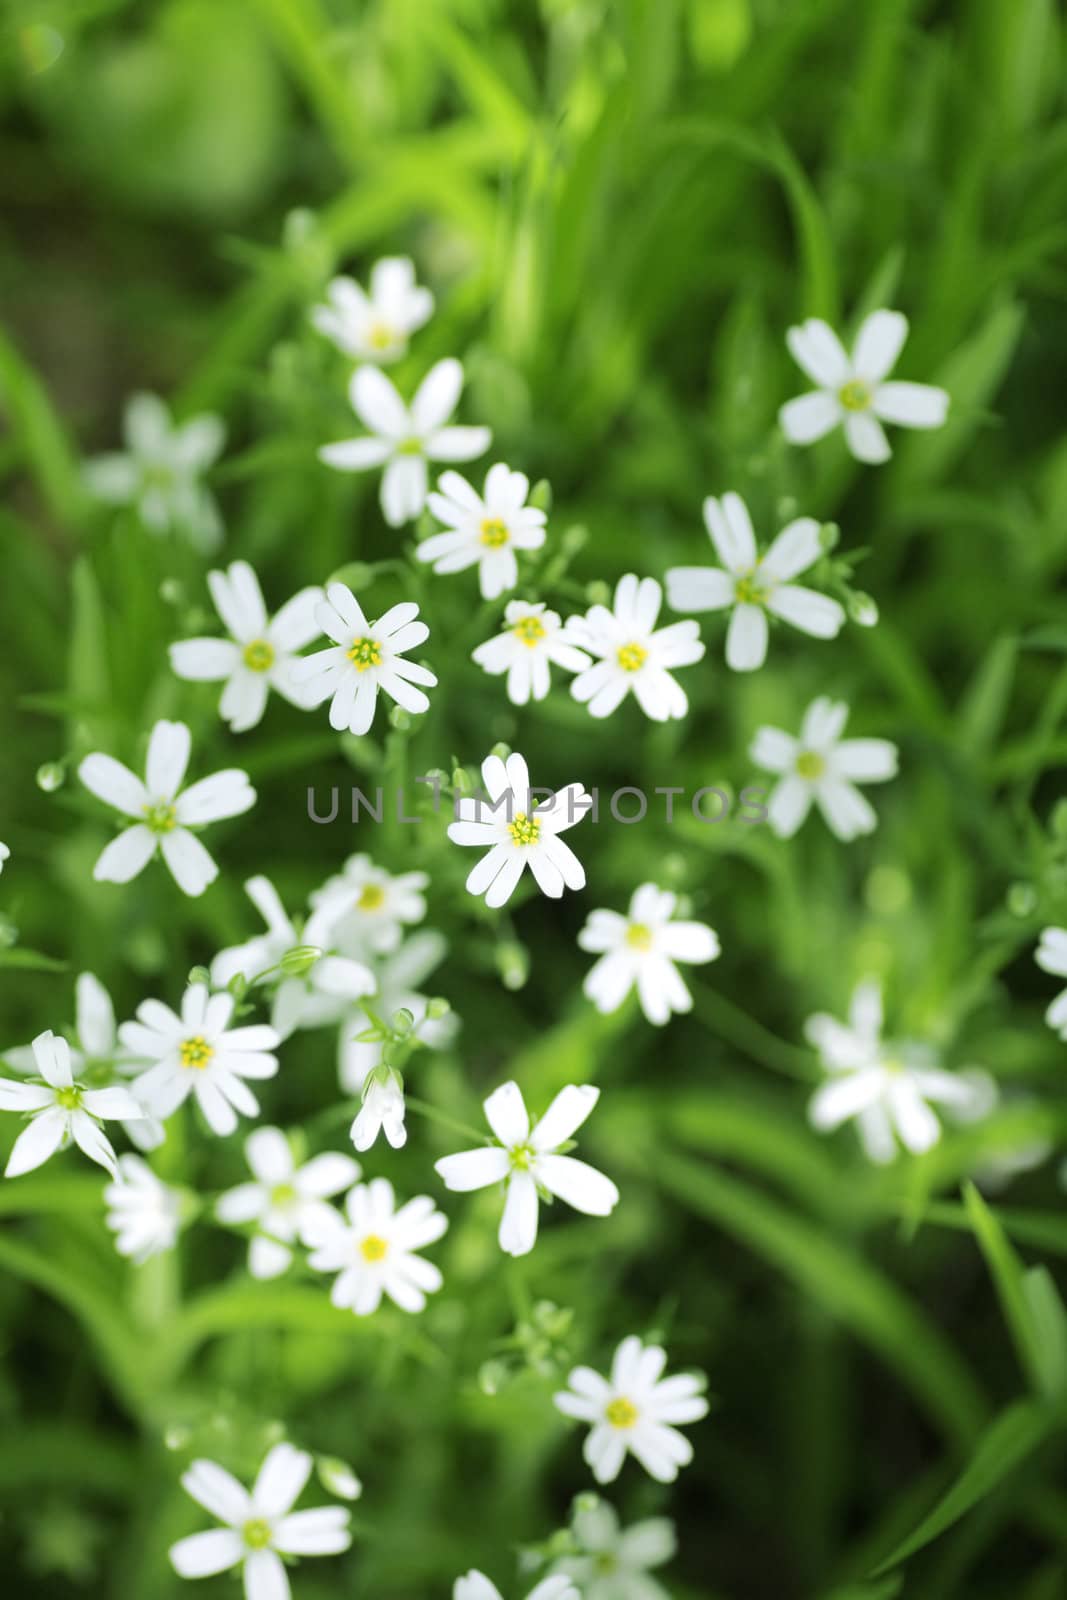 Small white flowers on a backround of green leaves and vegetation